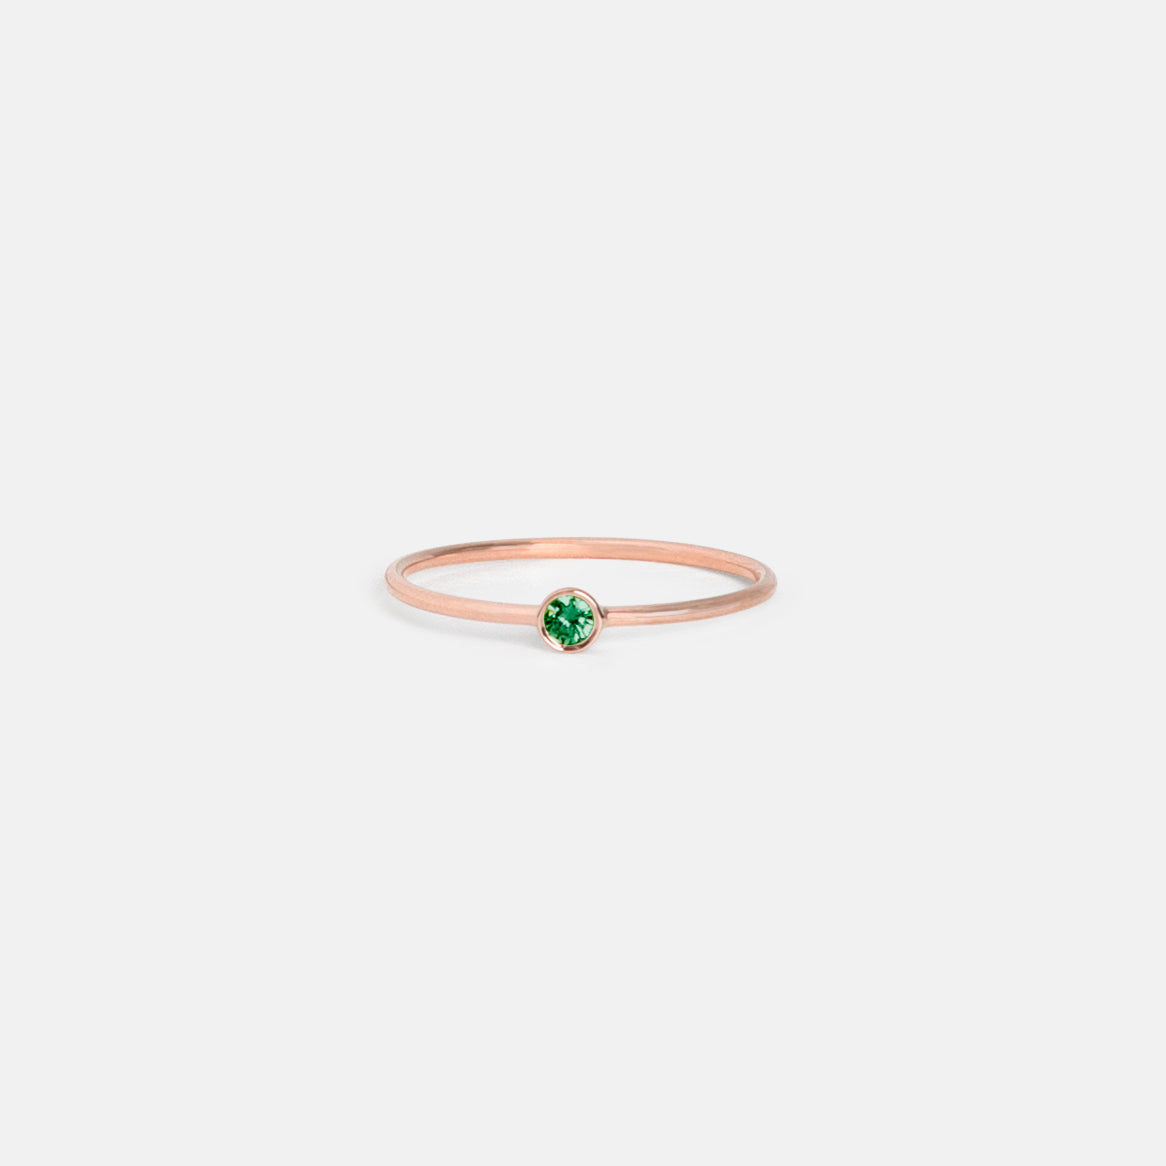 Large Kaya Ring in 14k Rose Gold set with Emerald by SHW Fine Jewelry